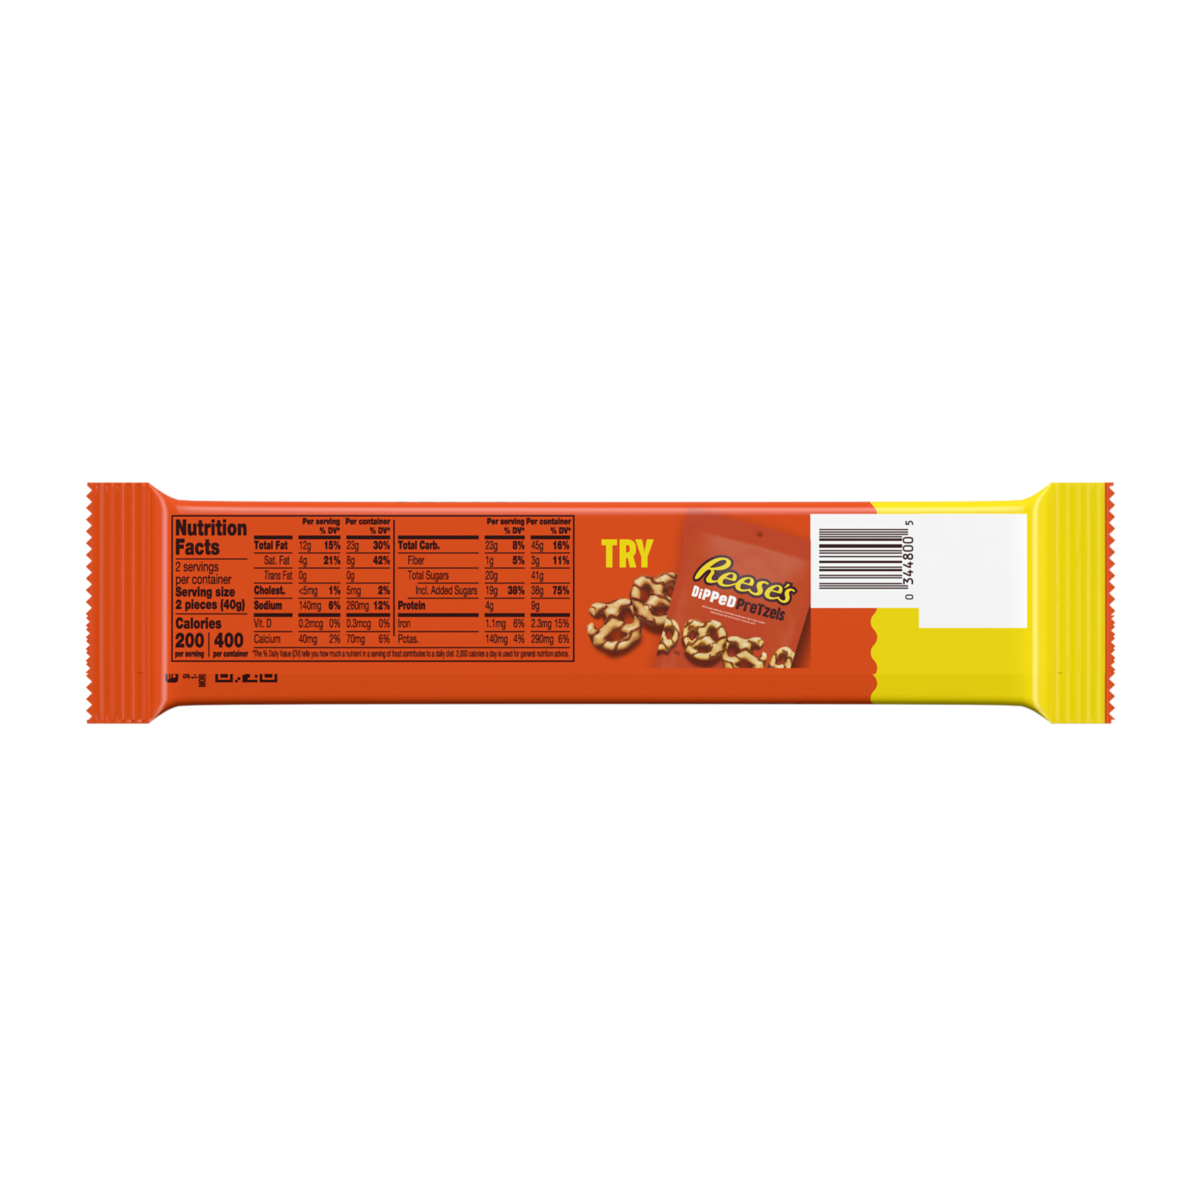 Reese's Peanut Butter Cups King Size 4 Cup 2.8 oz.